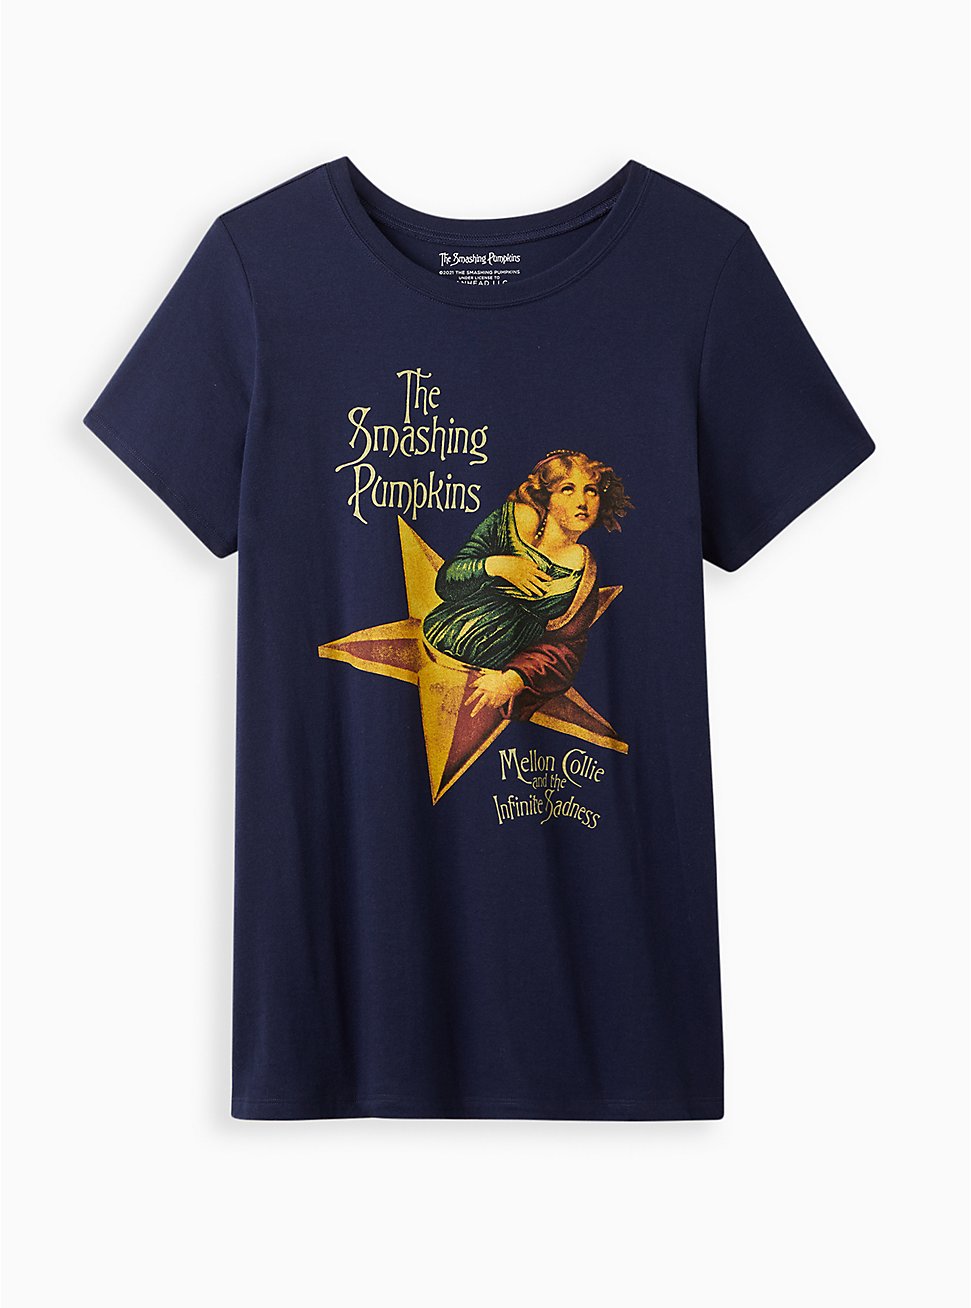 Plus Size Classic Fit Crew Tee - The Smashing Pumpkins Navy, PEACOAT, hi-res